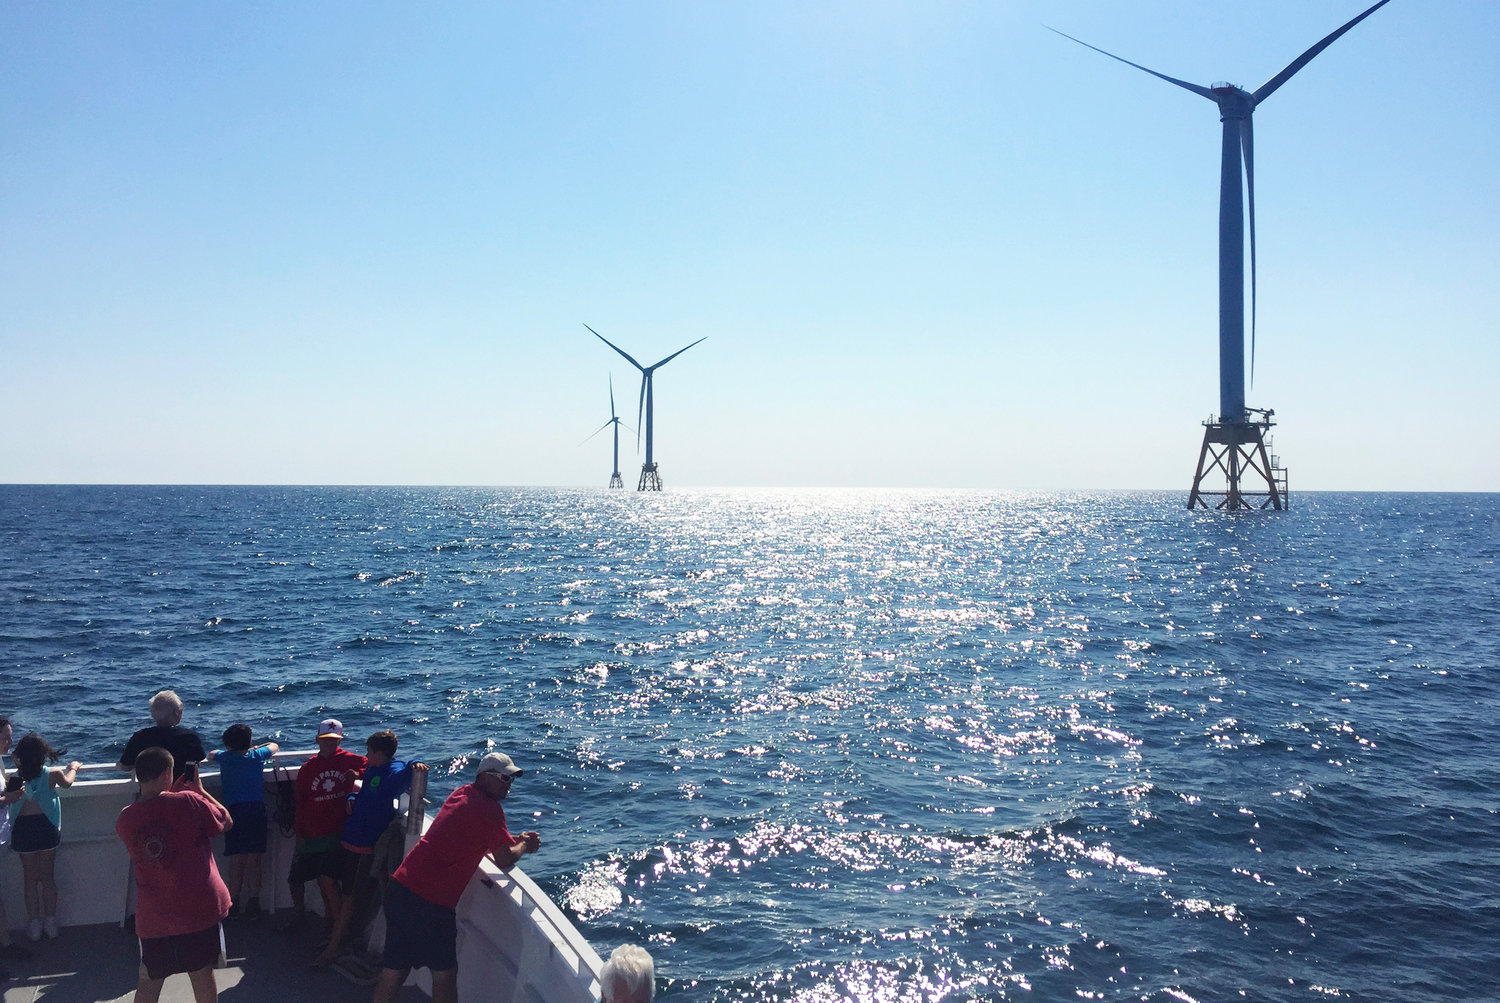 Block Island Wind Farm is the country’s first off-shore wind farm